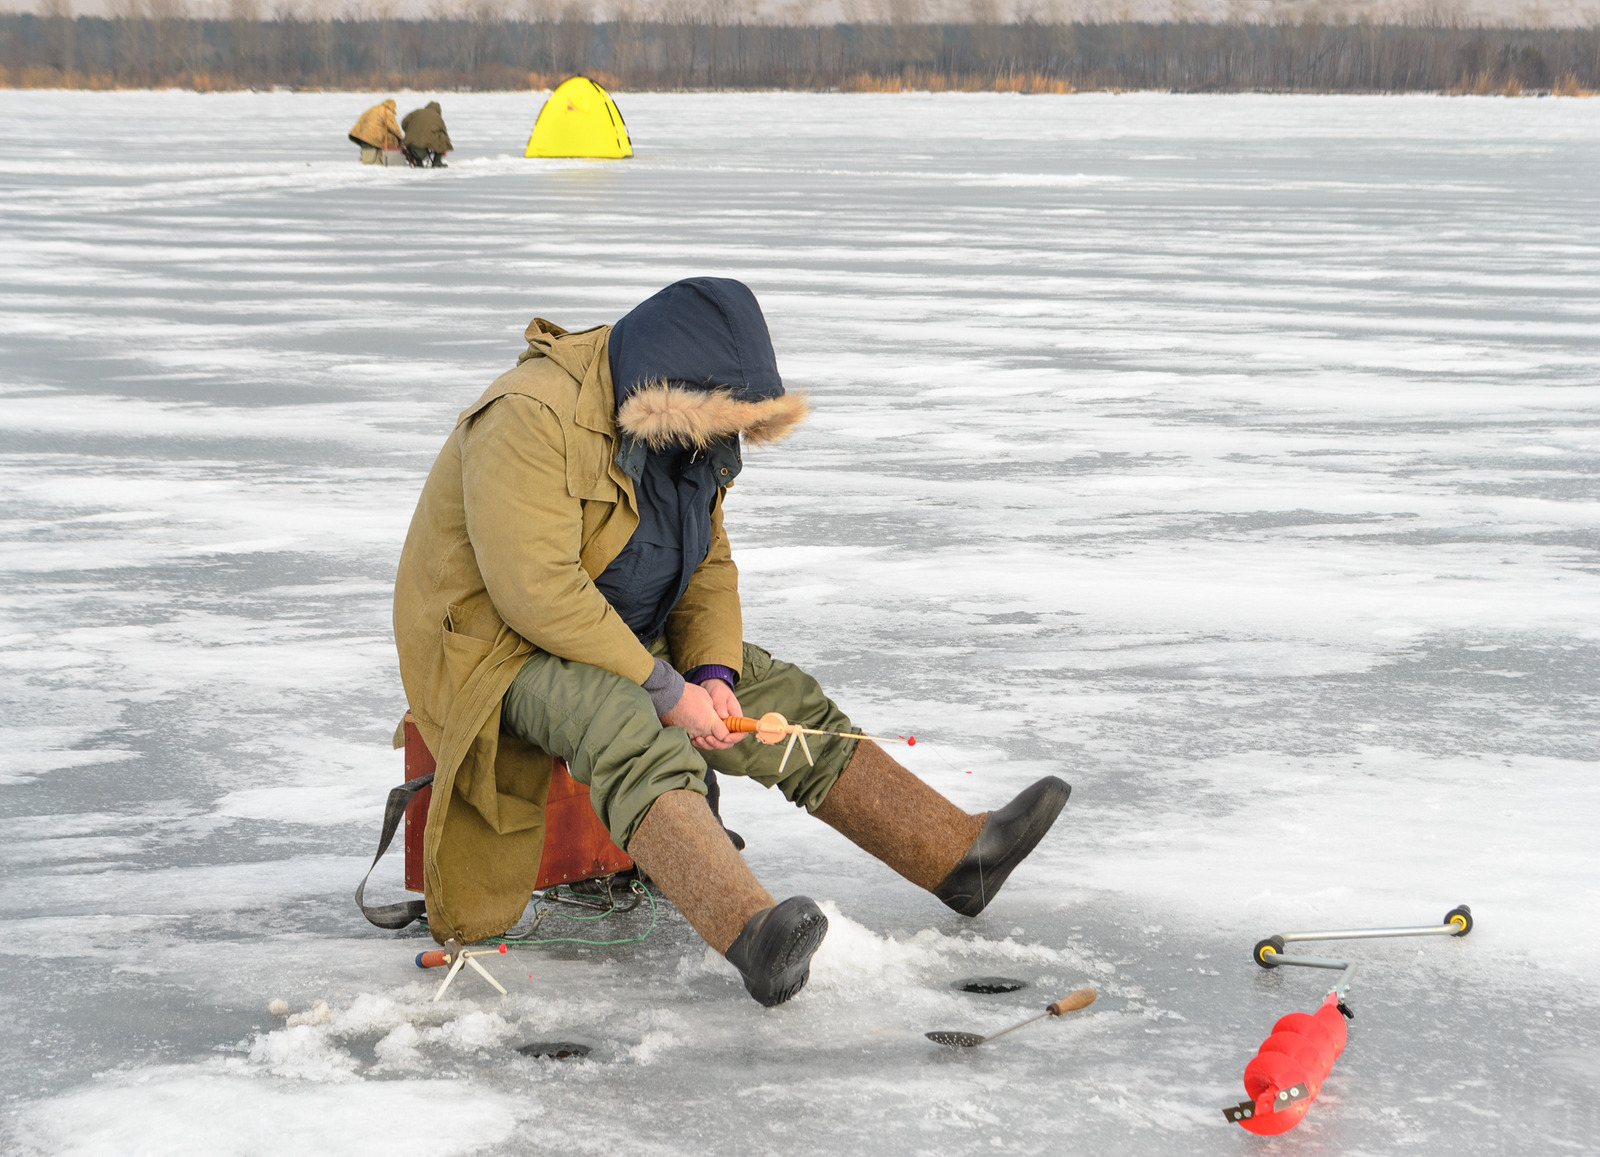 Fisherman catching a fish on the ice fishing